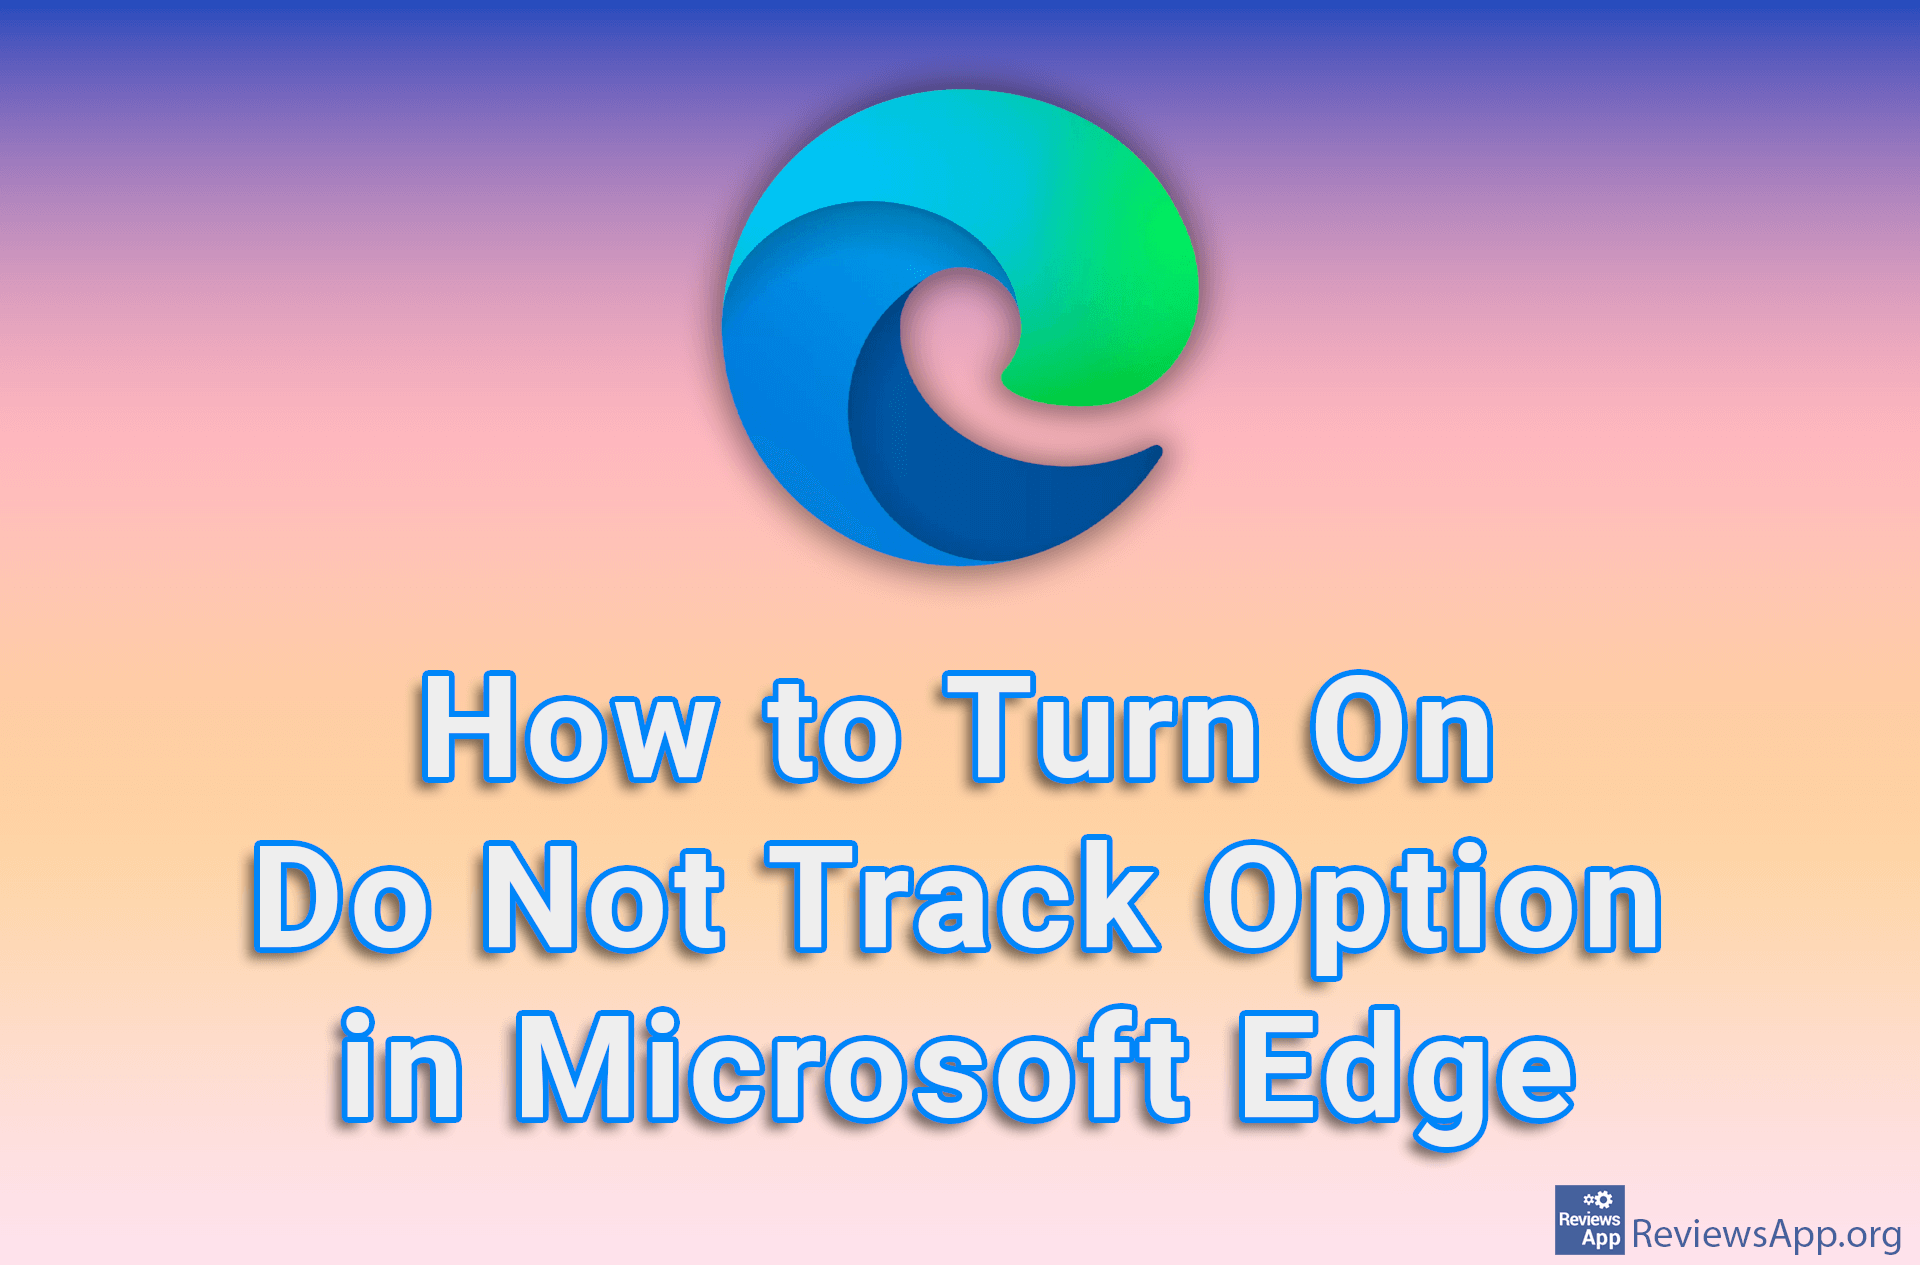 How to Turn On Do Not Track Option in Microsoft Edge